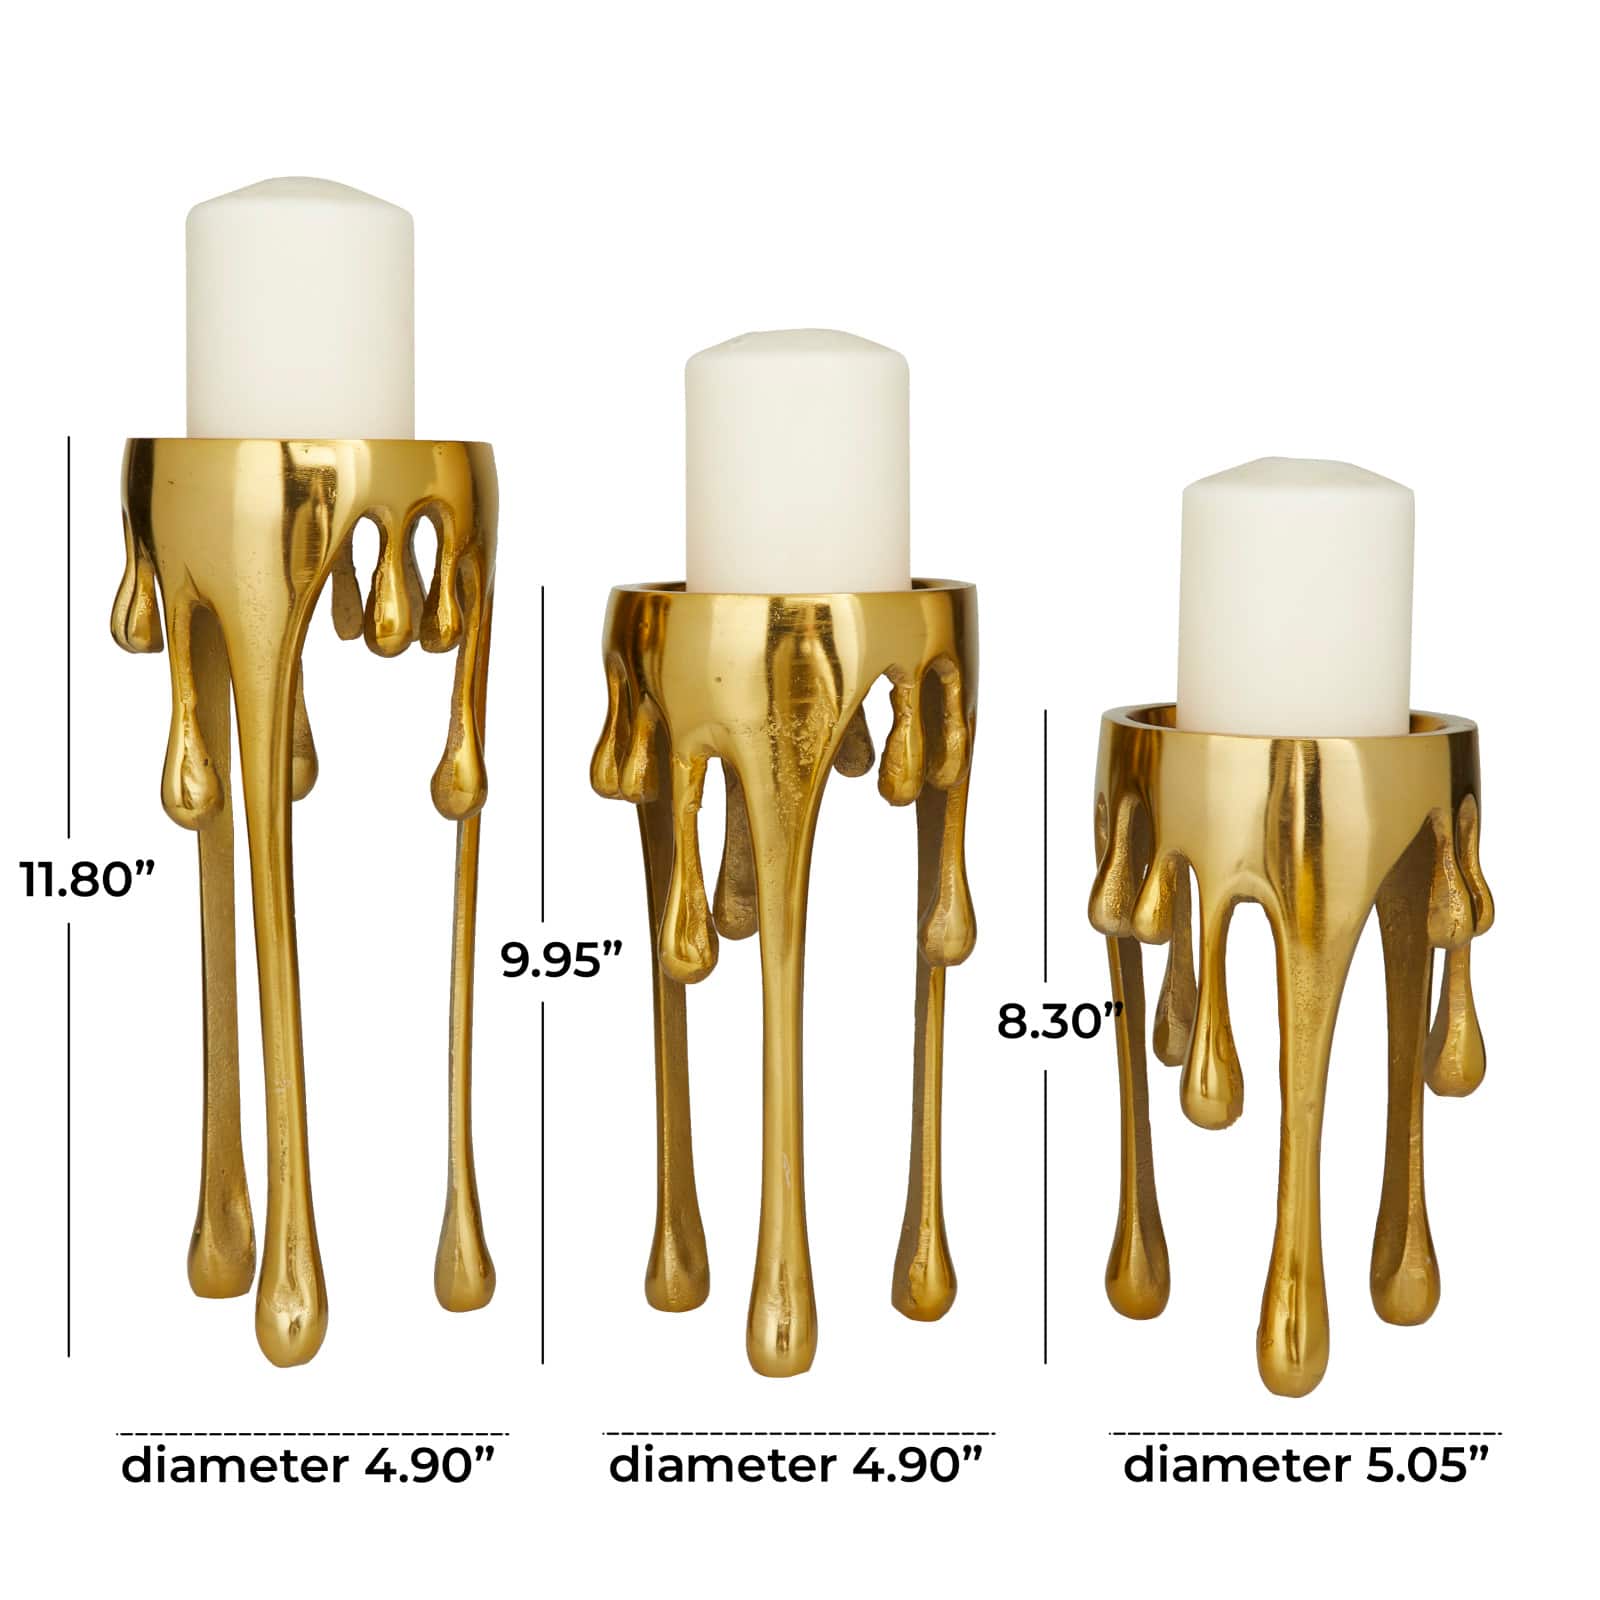 CosmoLiving by Cosmopolitan Gold Aluminum Pillar Candle Holder with Dripping Melting Designed Legs Set